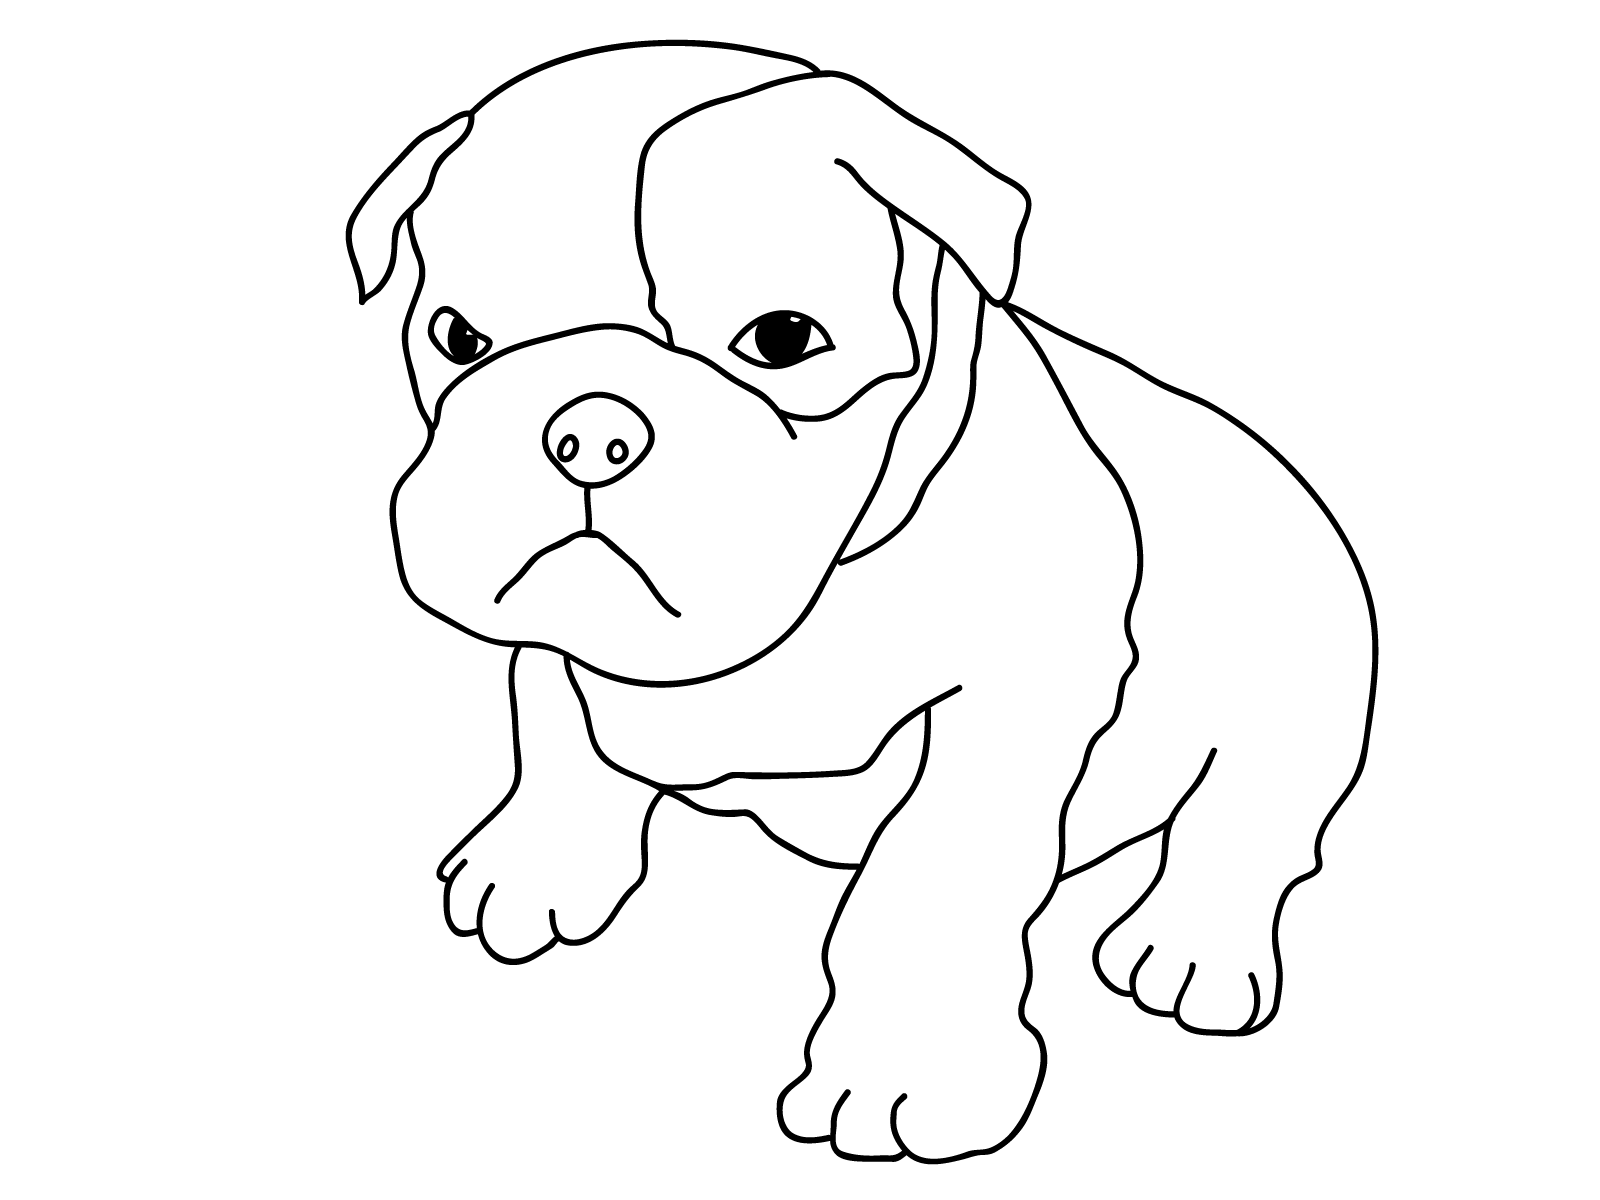 dog pictures coloring pages give your child dog coloring pages and make him happy pictures pages dog coloring 